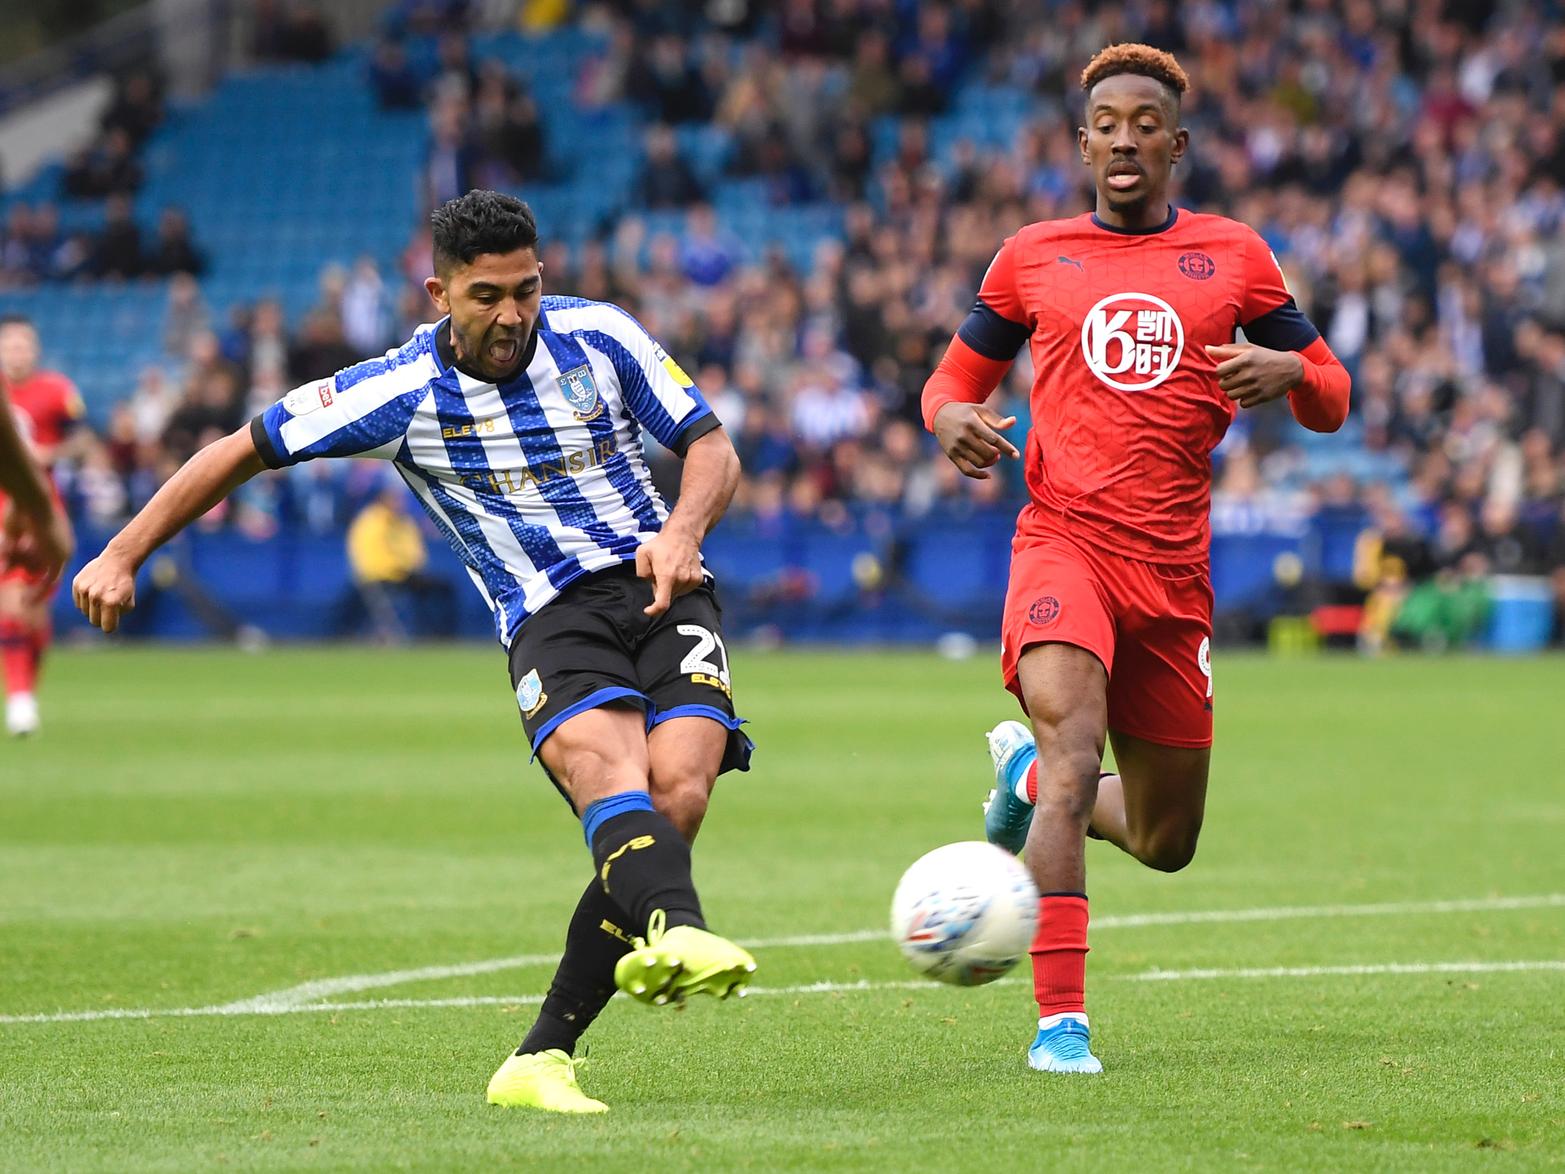 Sheffield Wednesday ace Massimo Luongo has pulled out of Australia's international break clash against Nepal with a knee injury. However, the club are hopeful of having him back to face Cardiff City next week. (Sheffield Star)